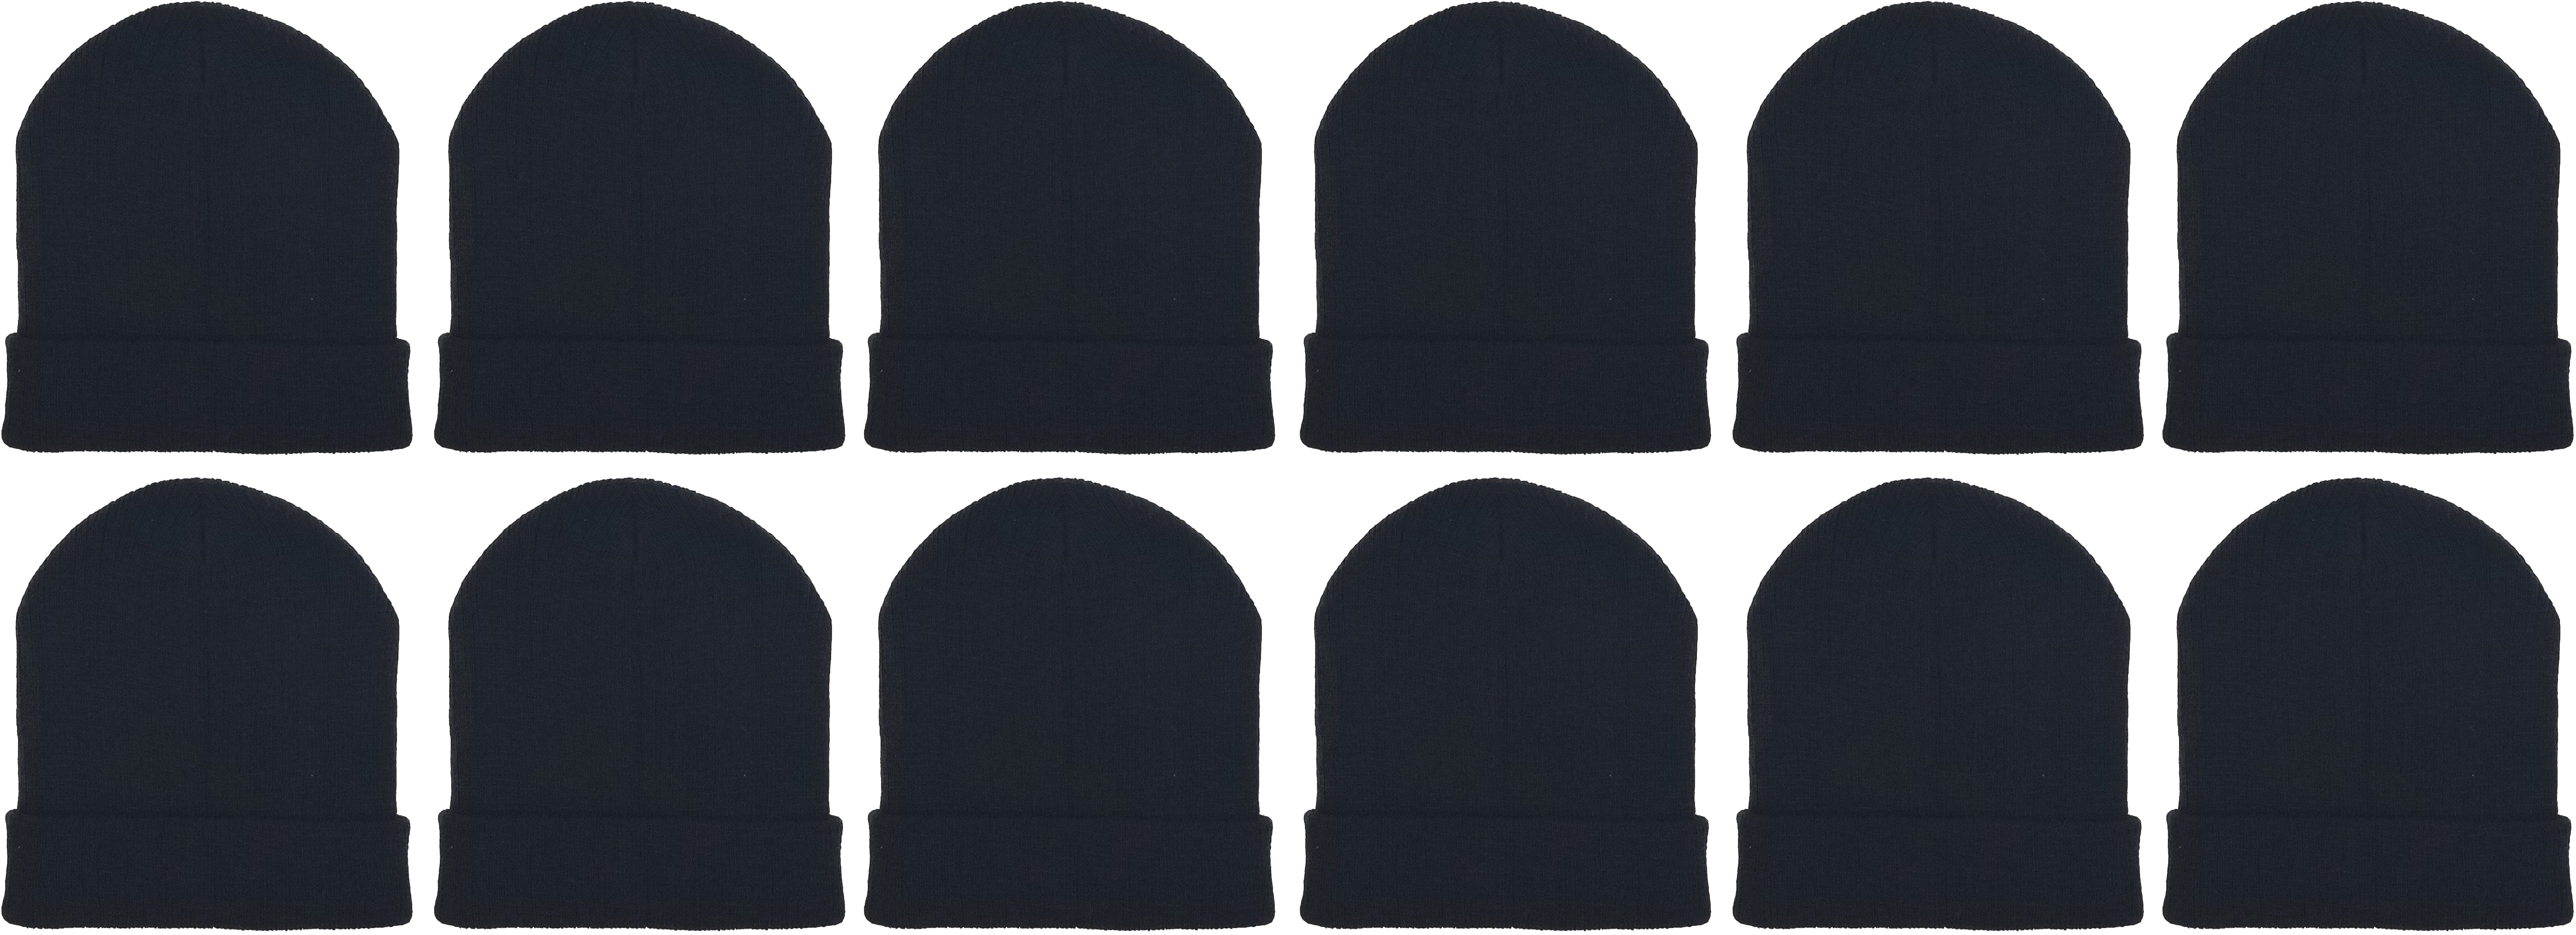 12 Pack Winter Beanie Hats for Men Women, Warm Cozy Knitted Cuffed ...